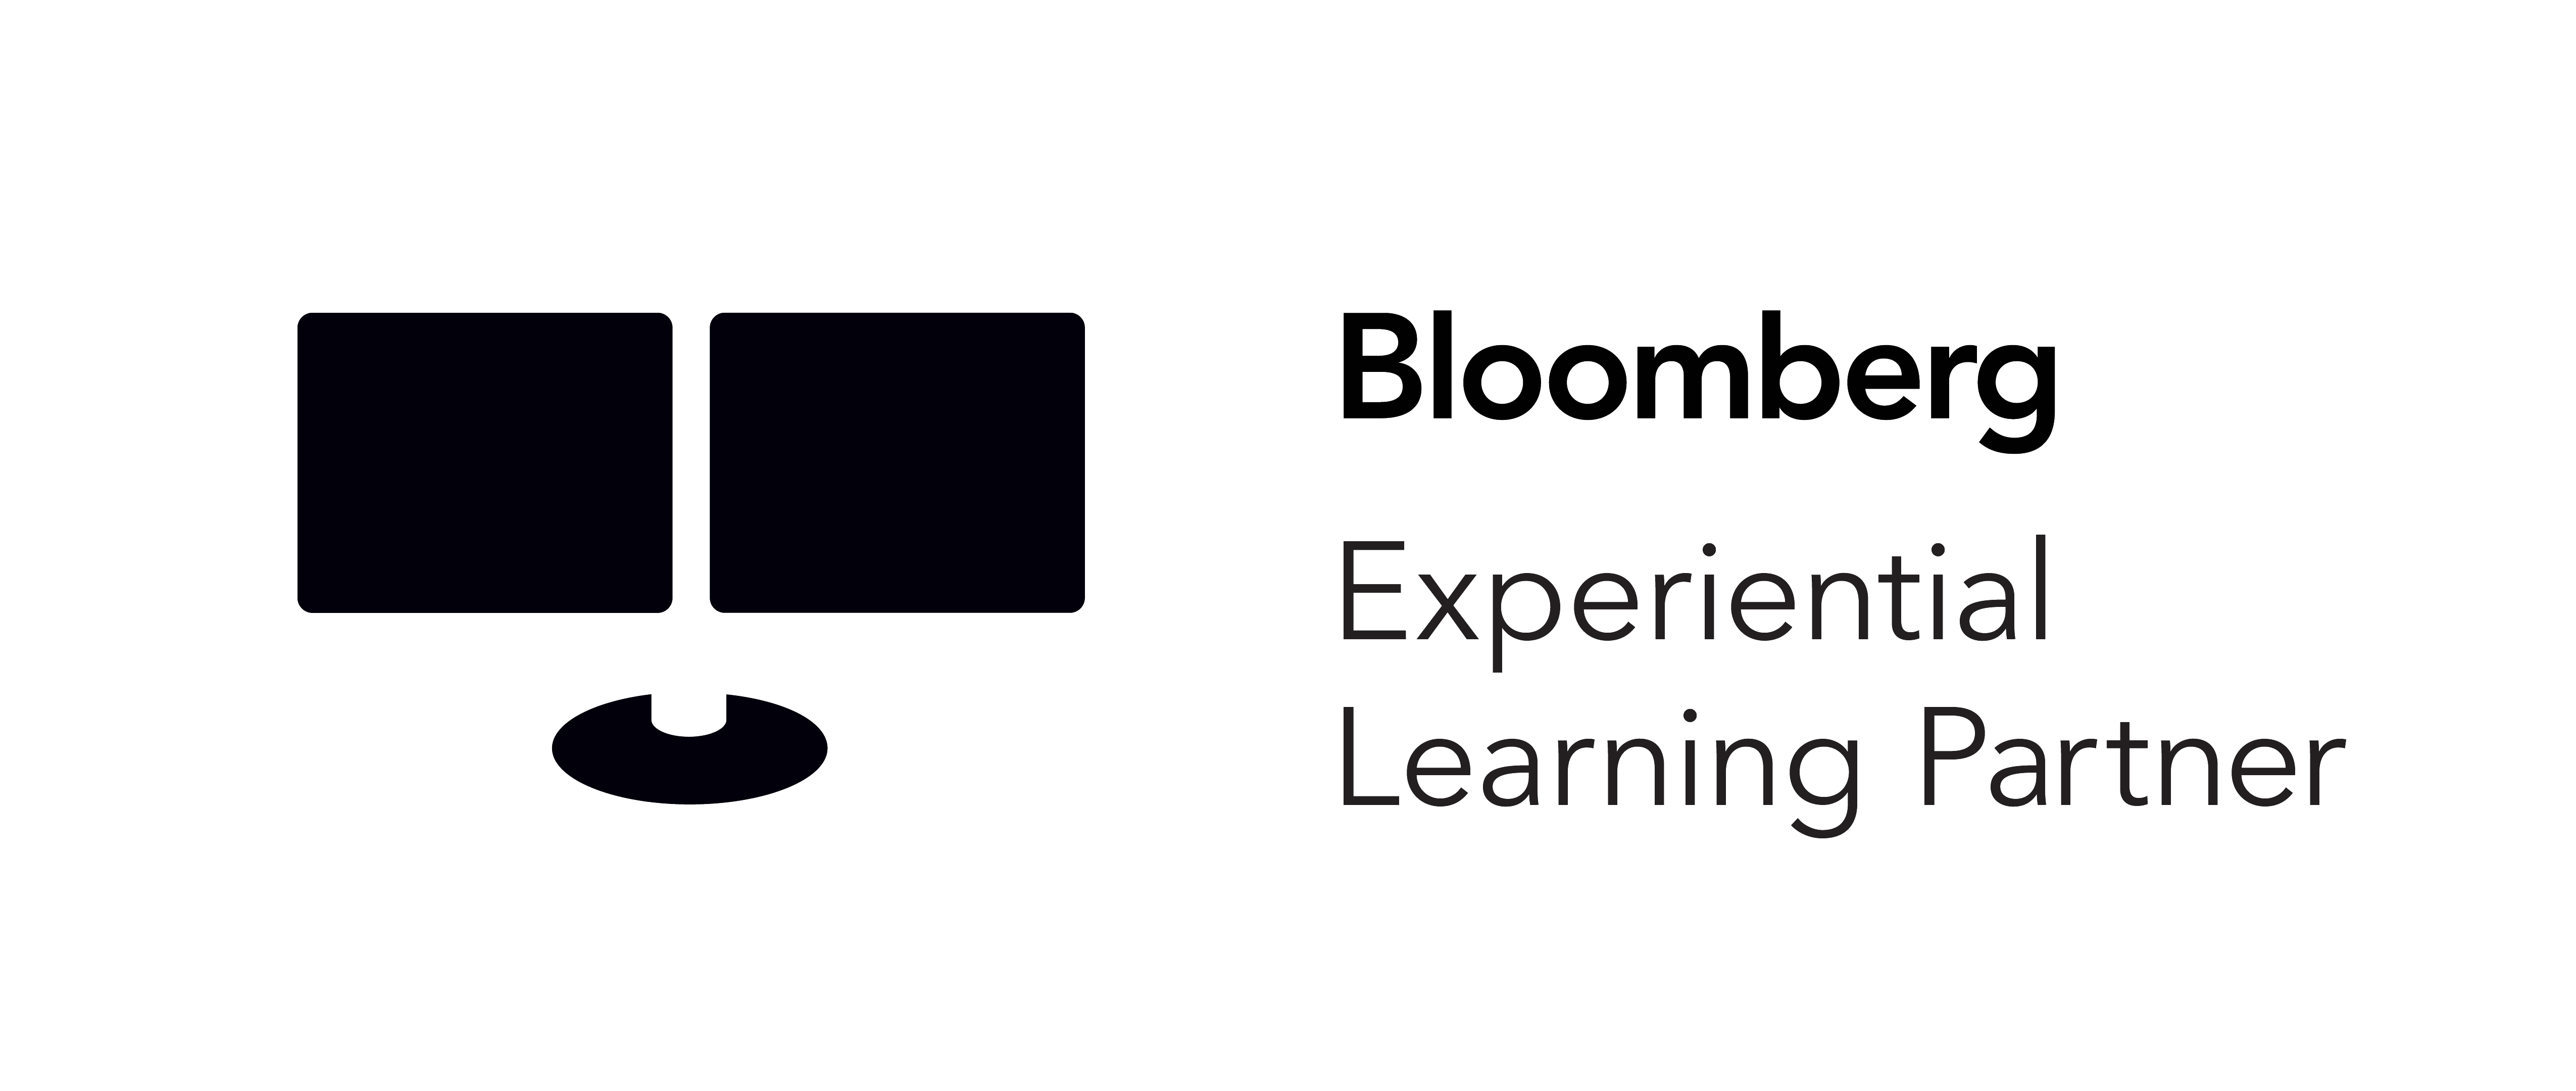 Bloomberg Experiential Learning Partner logo